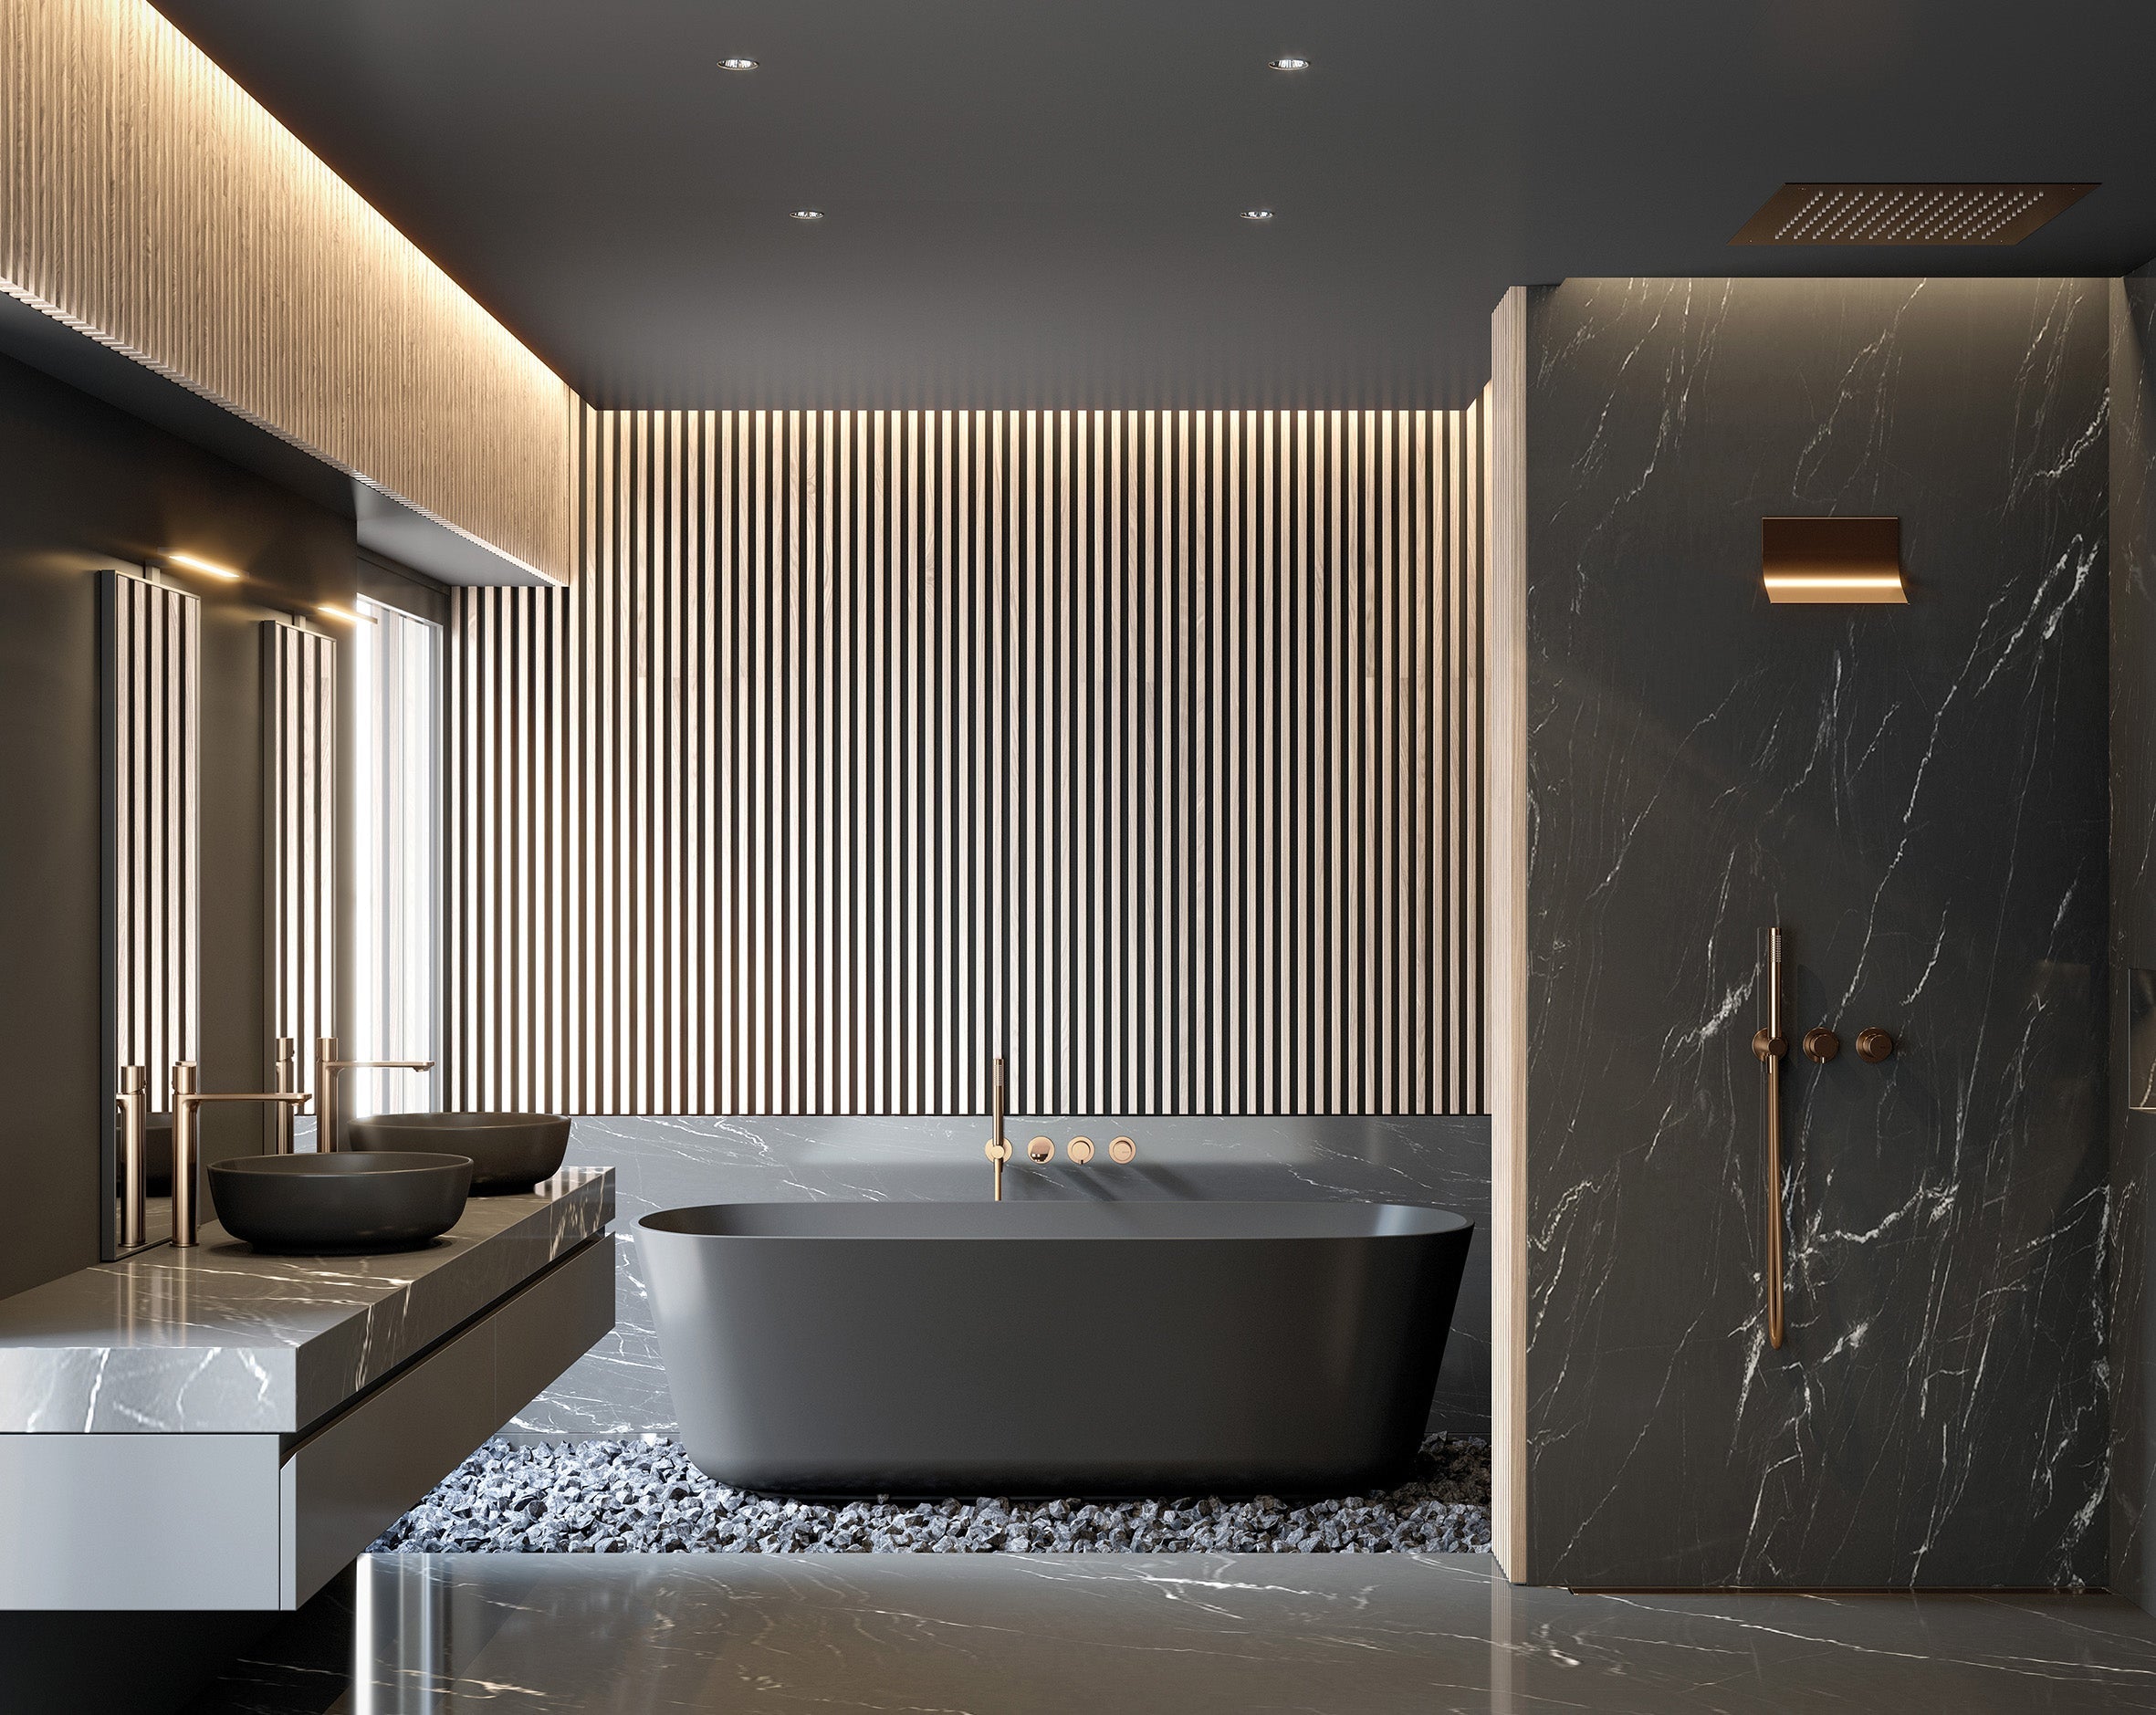 Luxury Designs for Kitchens and Bathrooms